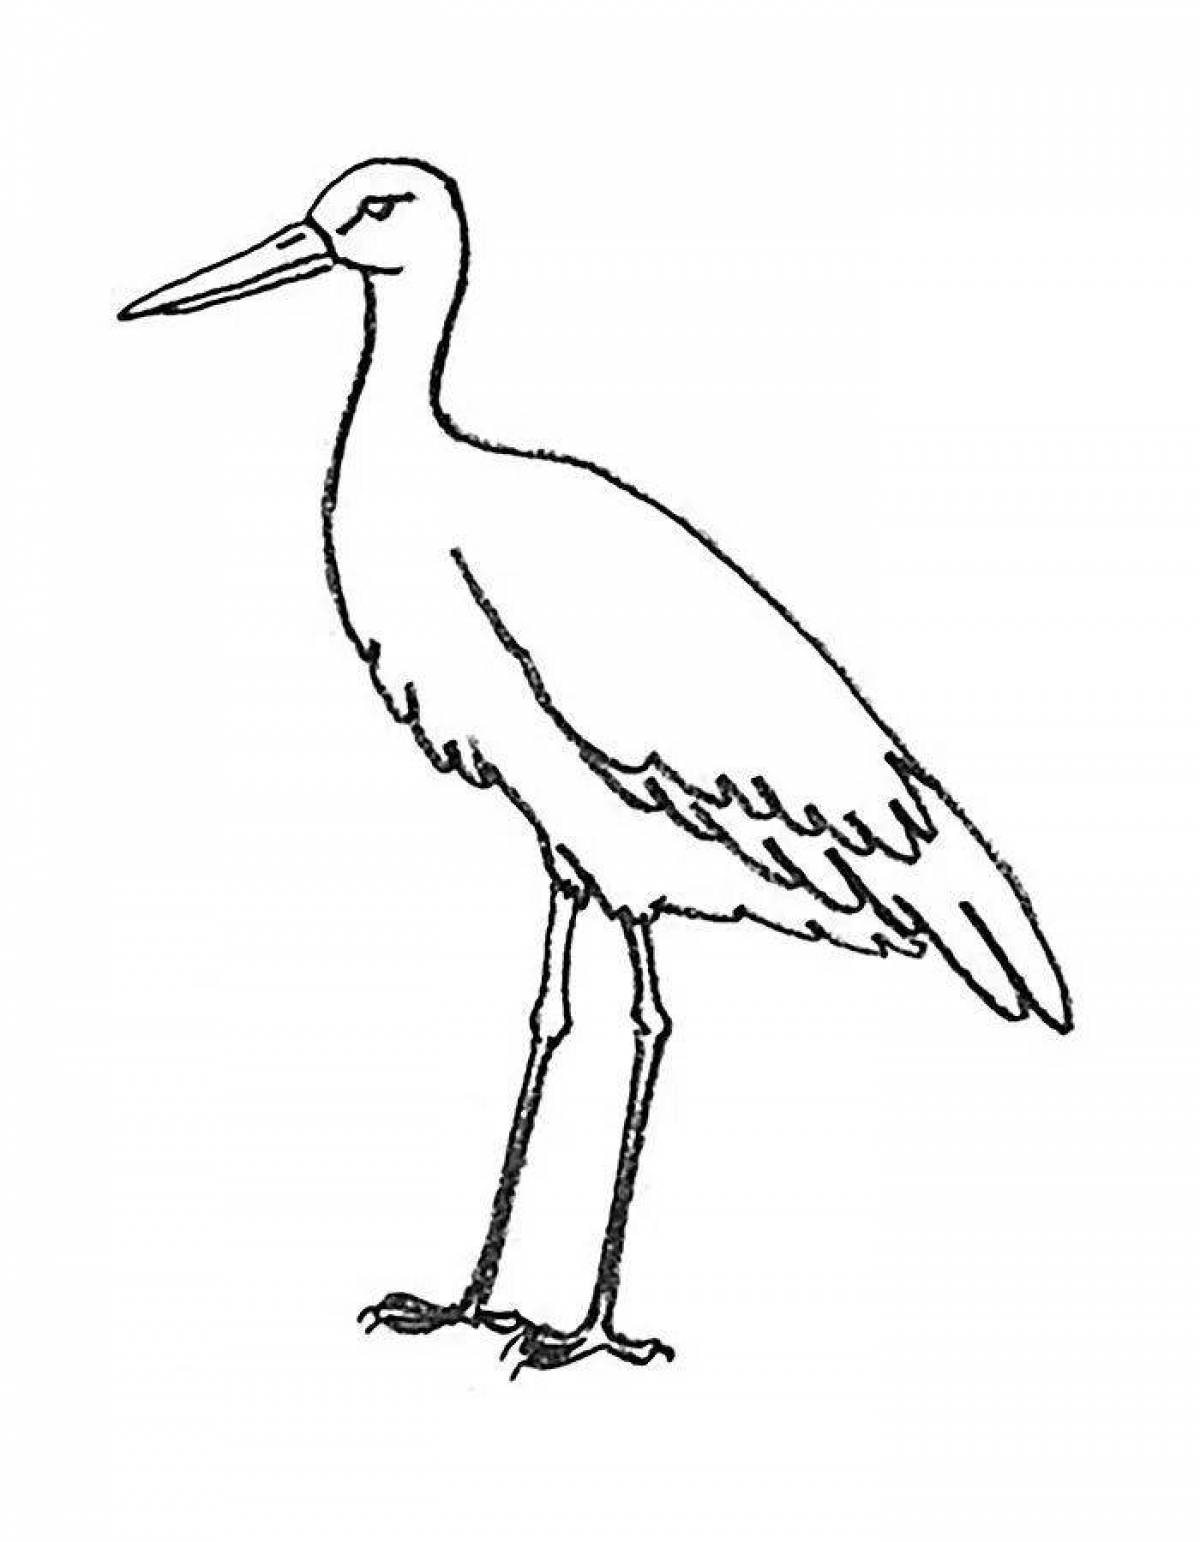 Adorable black stork coloring page